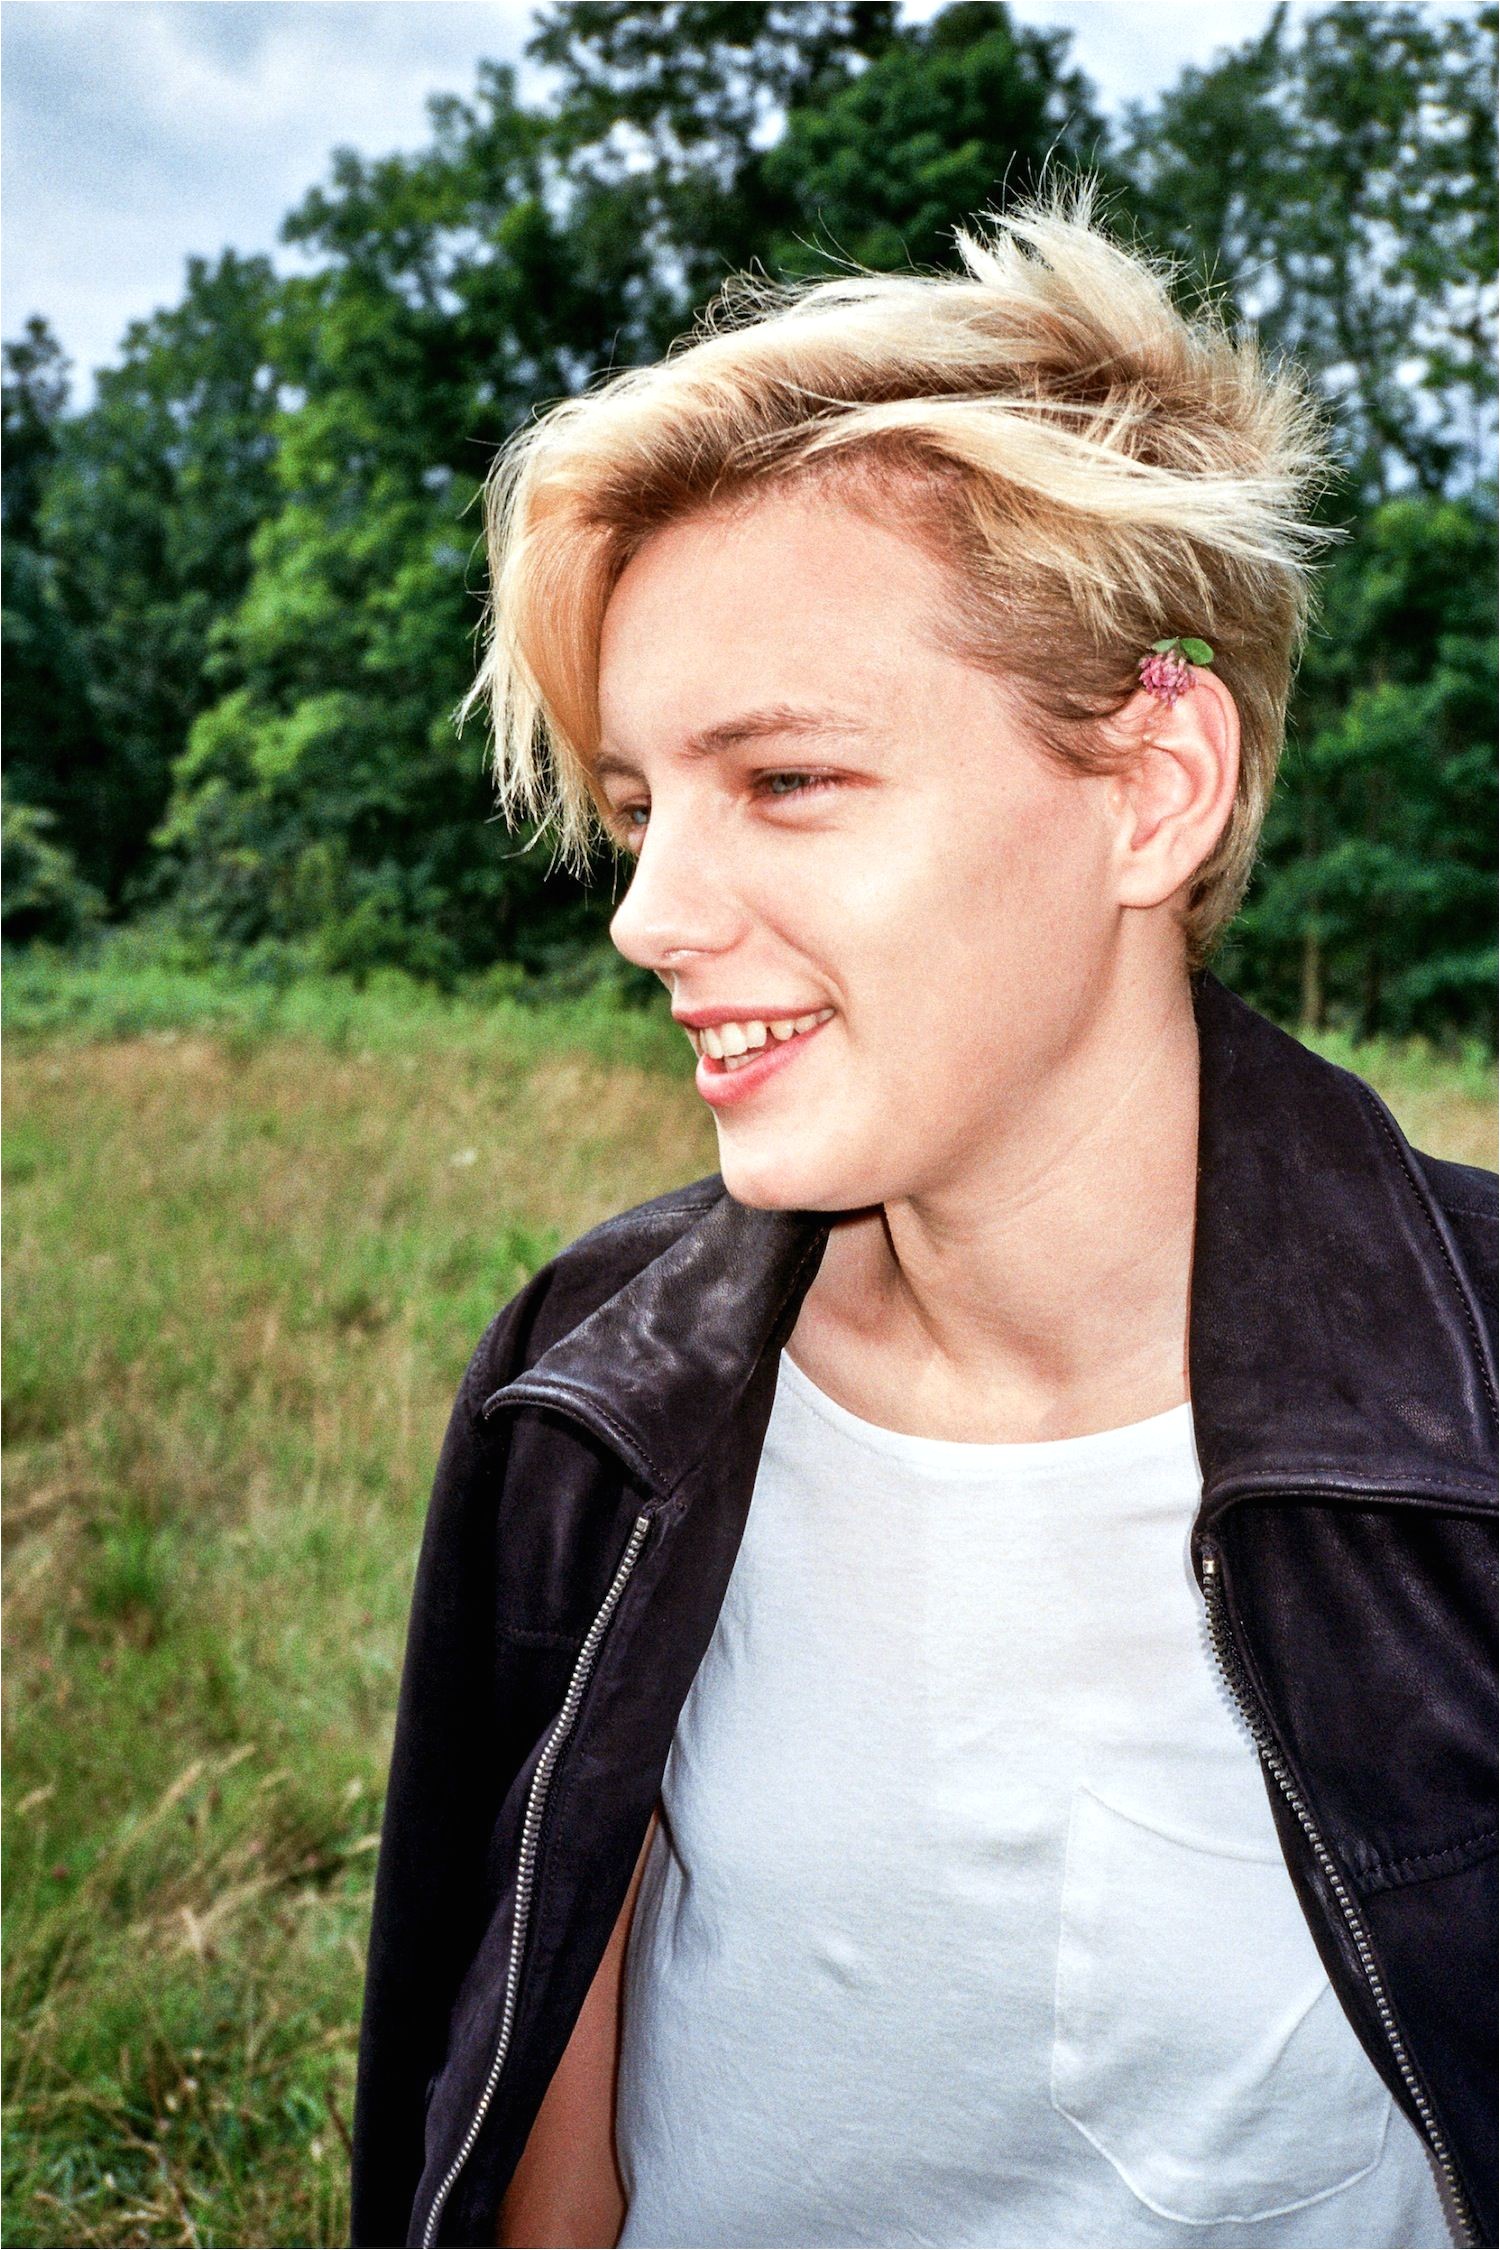 Urban Outfitters Blog Dreamers Doers Erika Linder